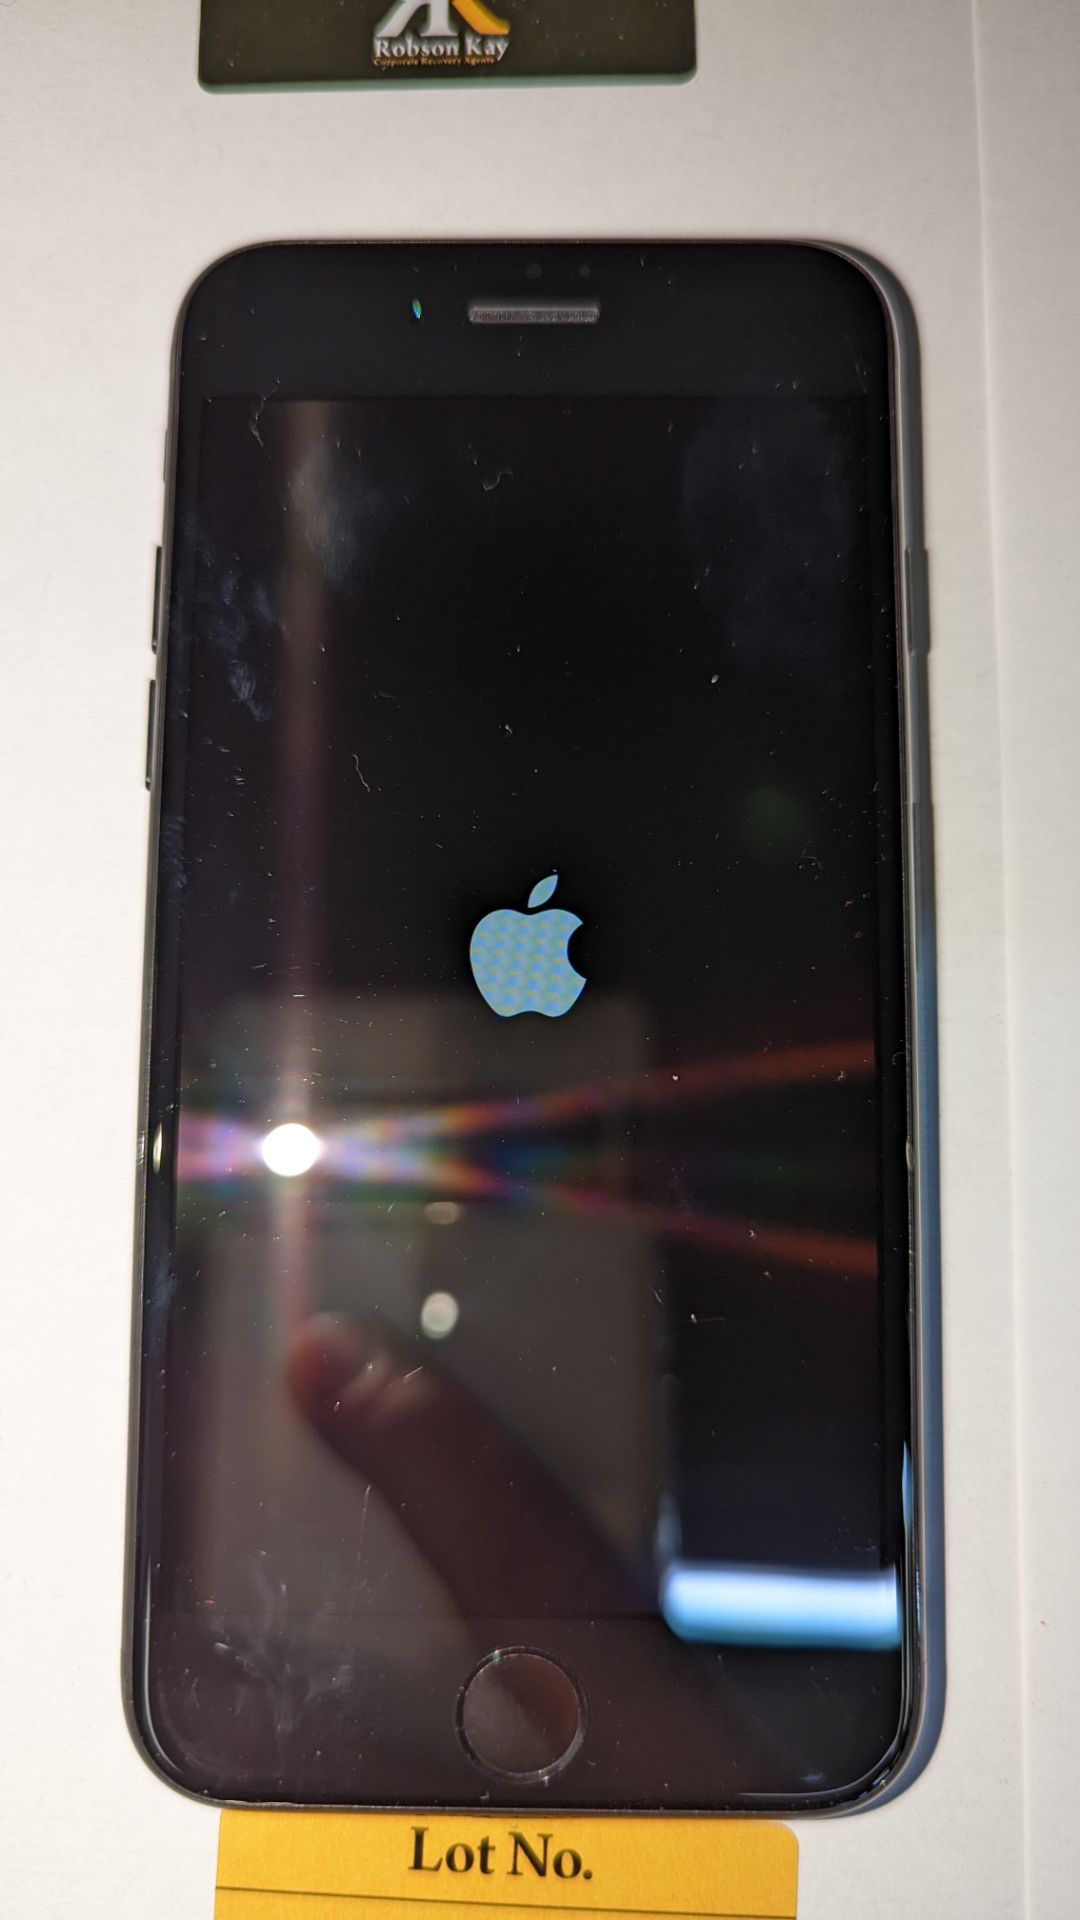 Apple iPhone 7, 32GB capacity, model A1778. No ancillaries or accessories - Image 12 of 12